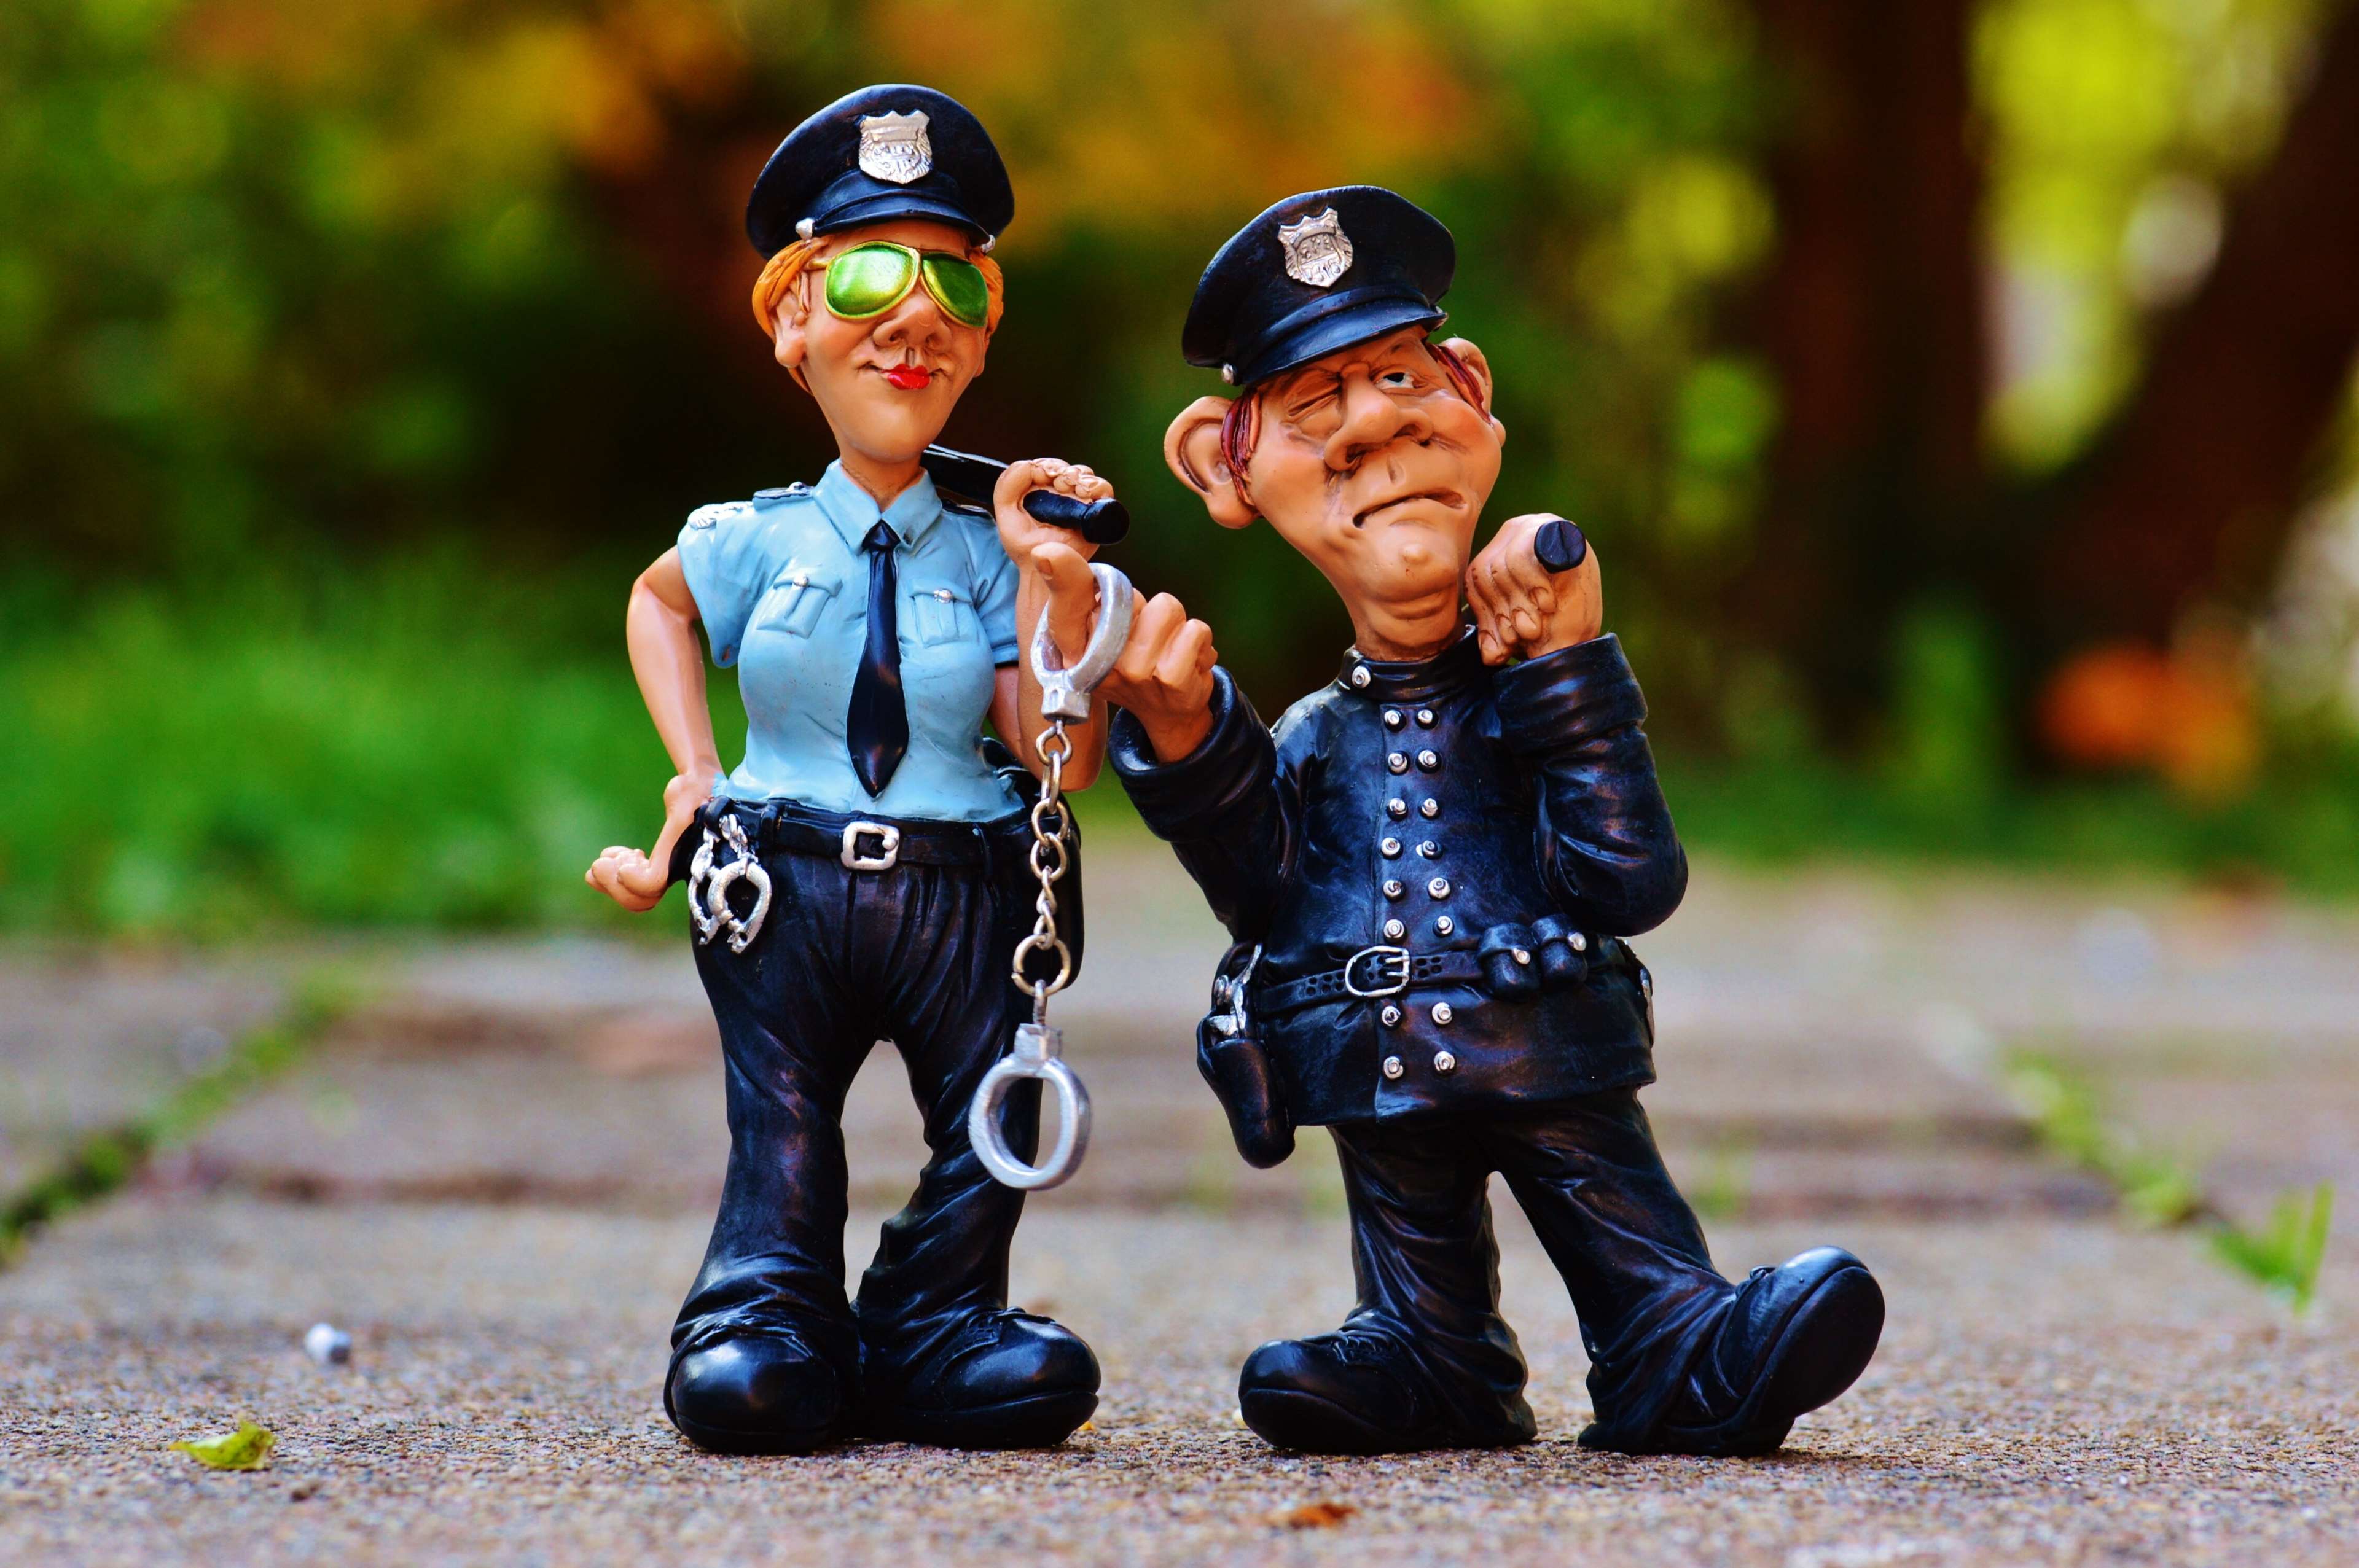 Batons, Cops, Figurines, Handcuffs, Miniature, Police - Do Police Keep Their Handcuffs , HD Wallpaper & Backgrounds